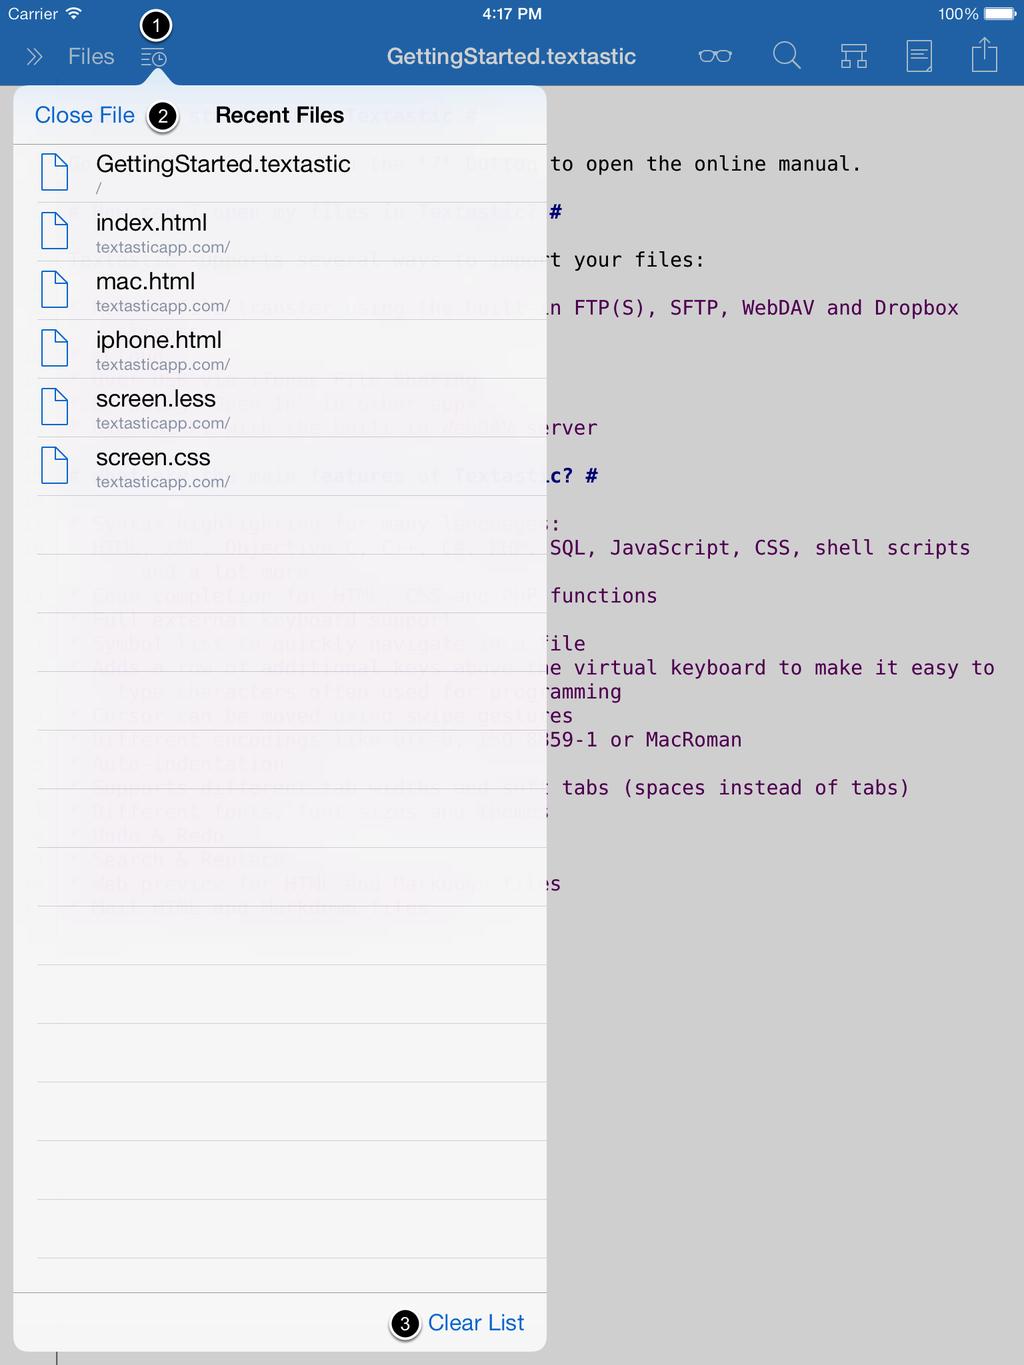 Tap on the recent files button (1) You can show a list of Recent Files by tapping on the